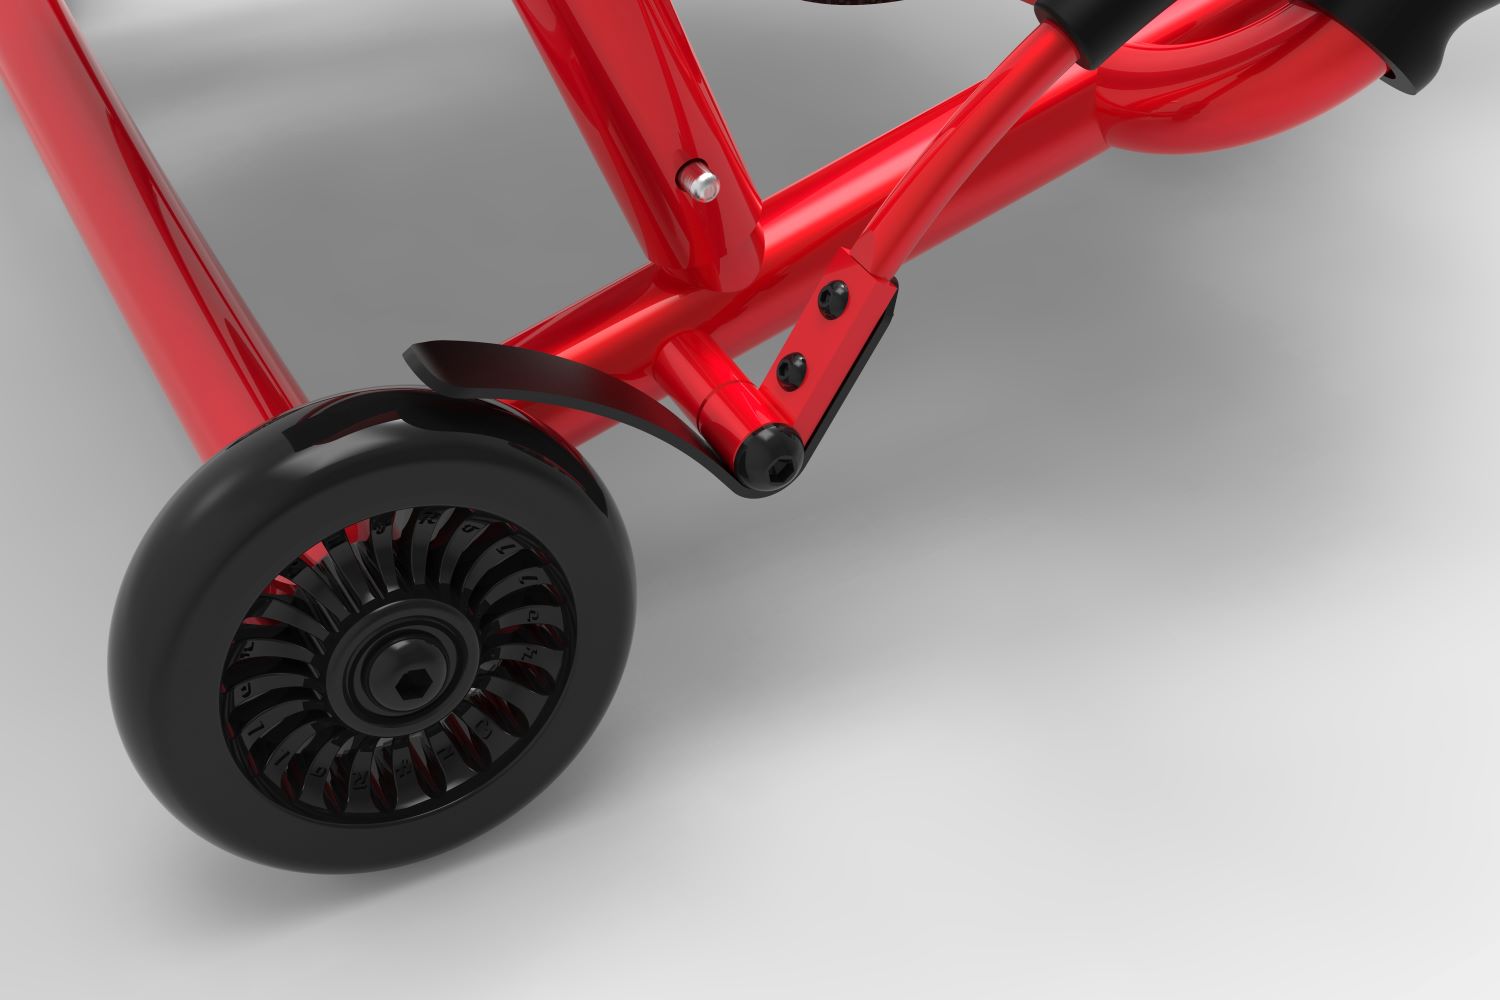 Ezyroller with Red Steel Frame from MindWare